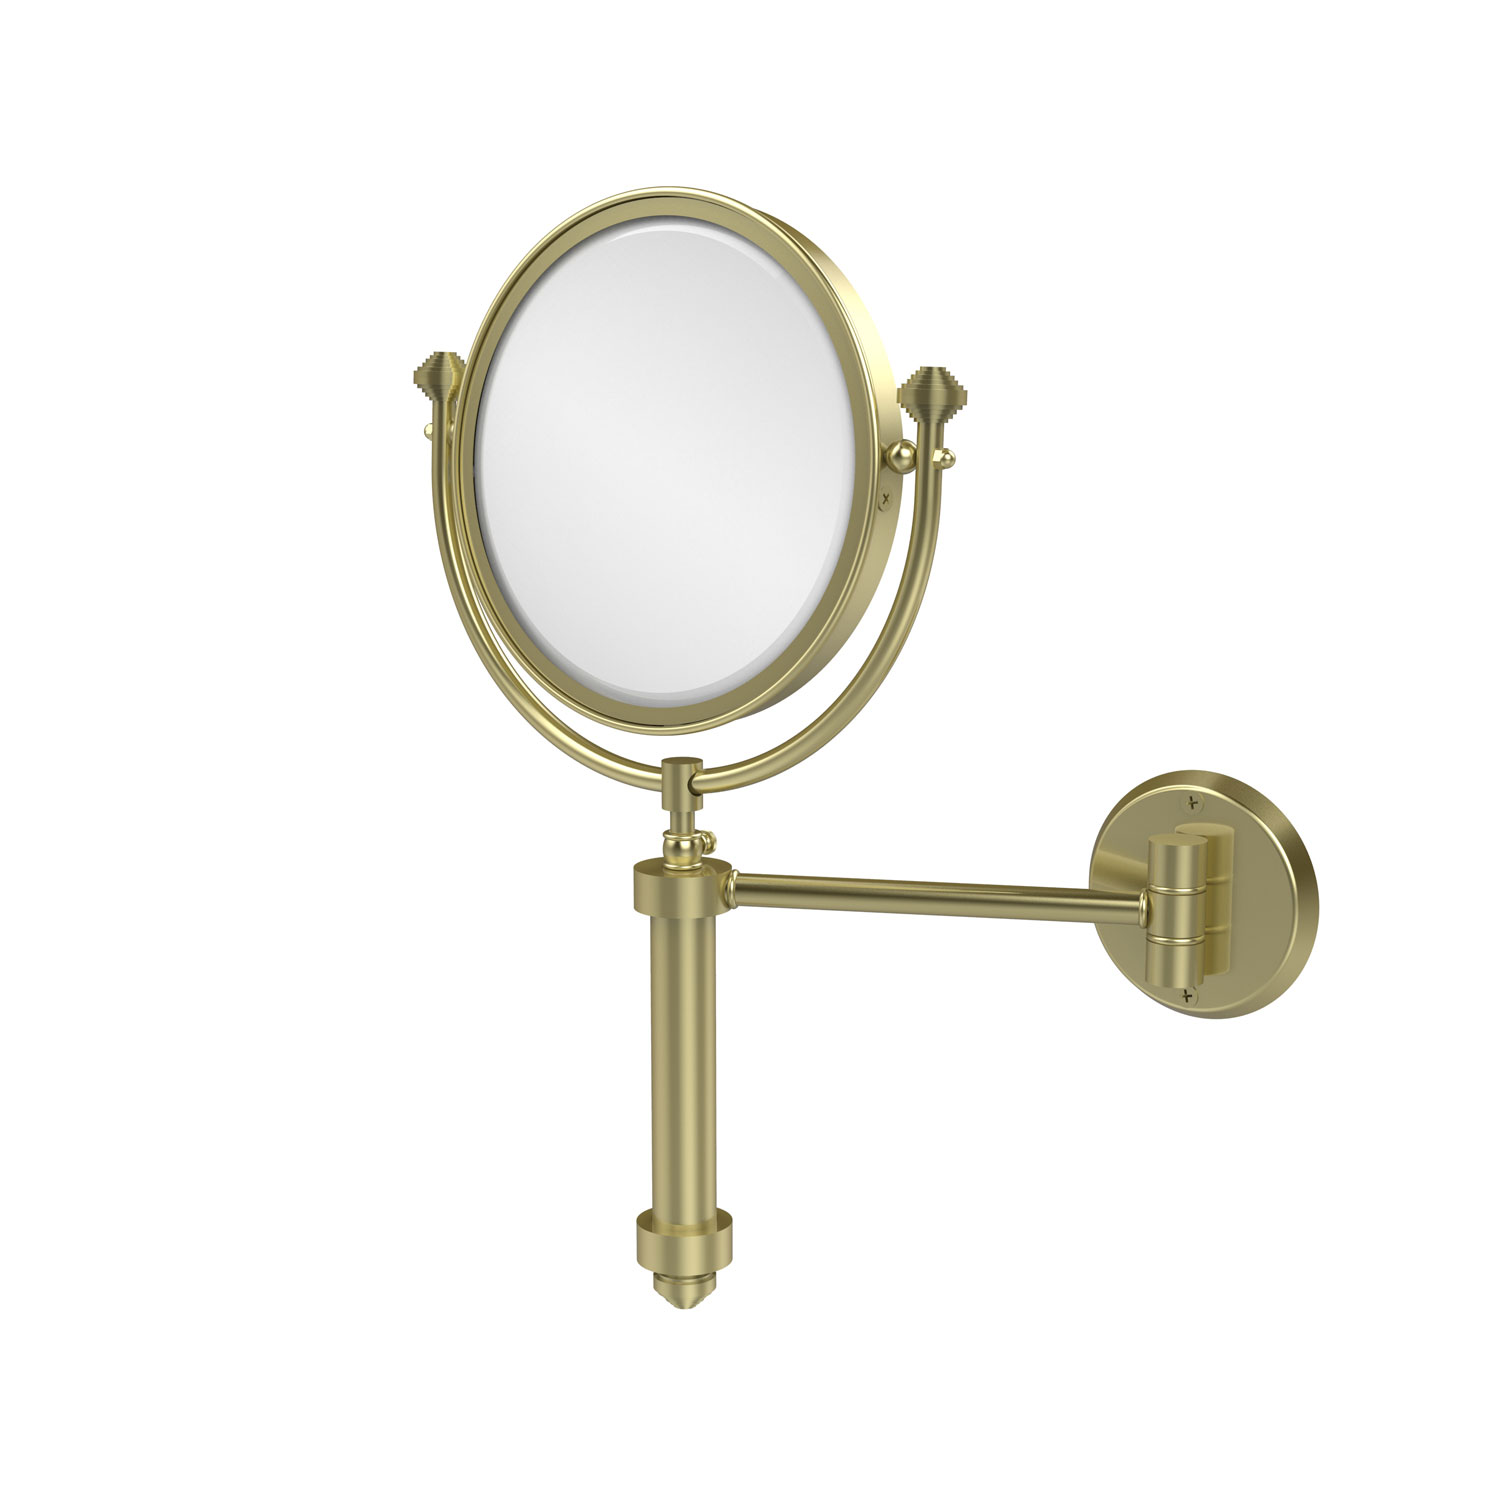 Southbeach Collection Wall Mounted Make-Up Mirror 8 Inch Diameter With 2X Magnification, Satin Brass